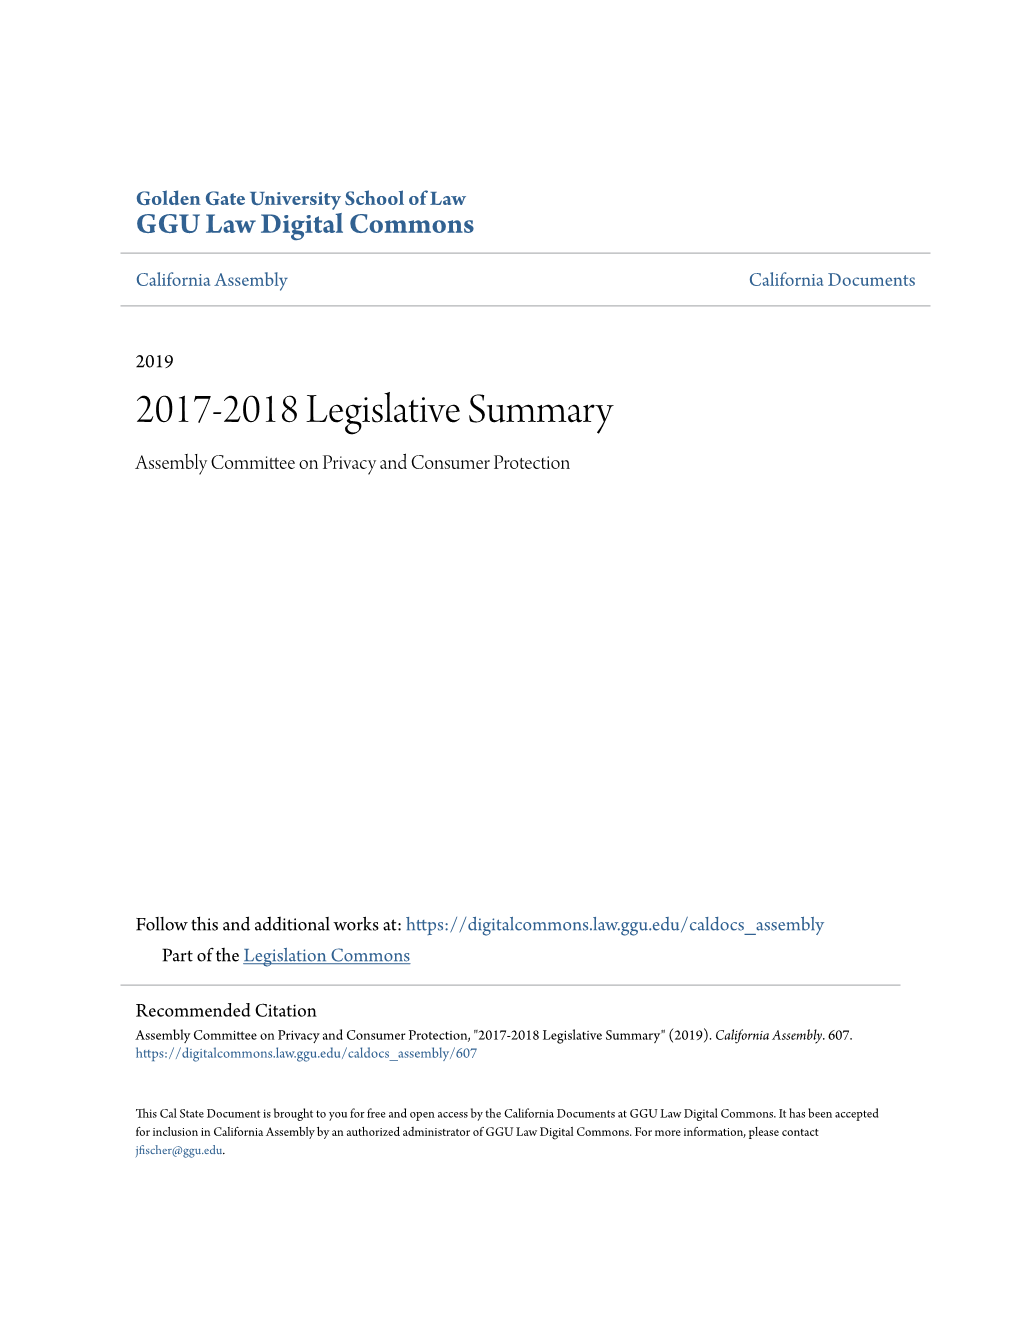 2017-2018 Legislative Summary Assembly Committee on Privacy and Consumer Protection